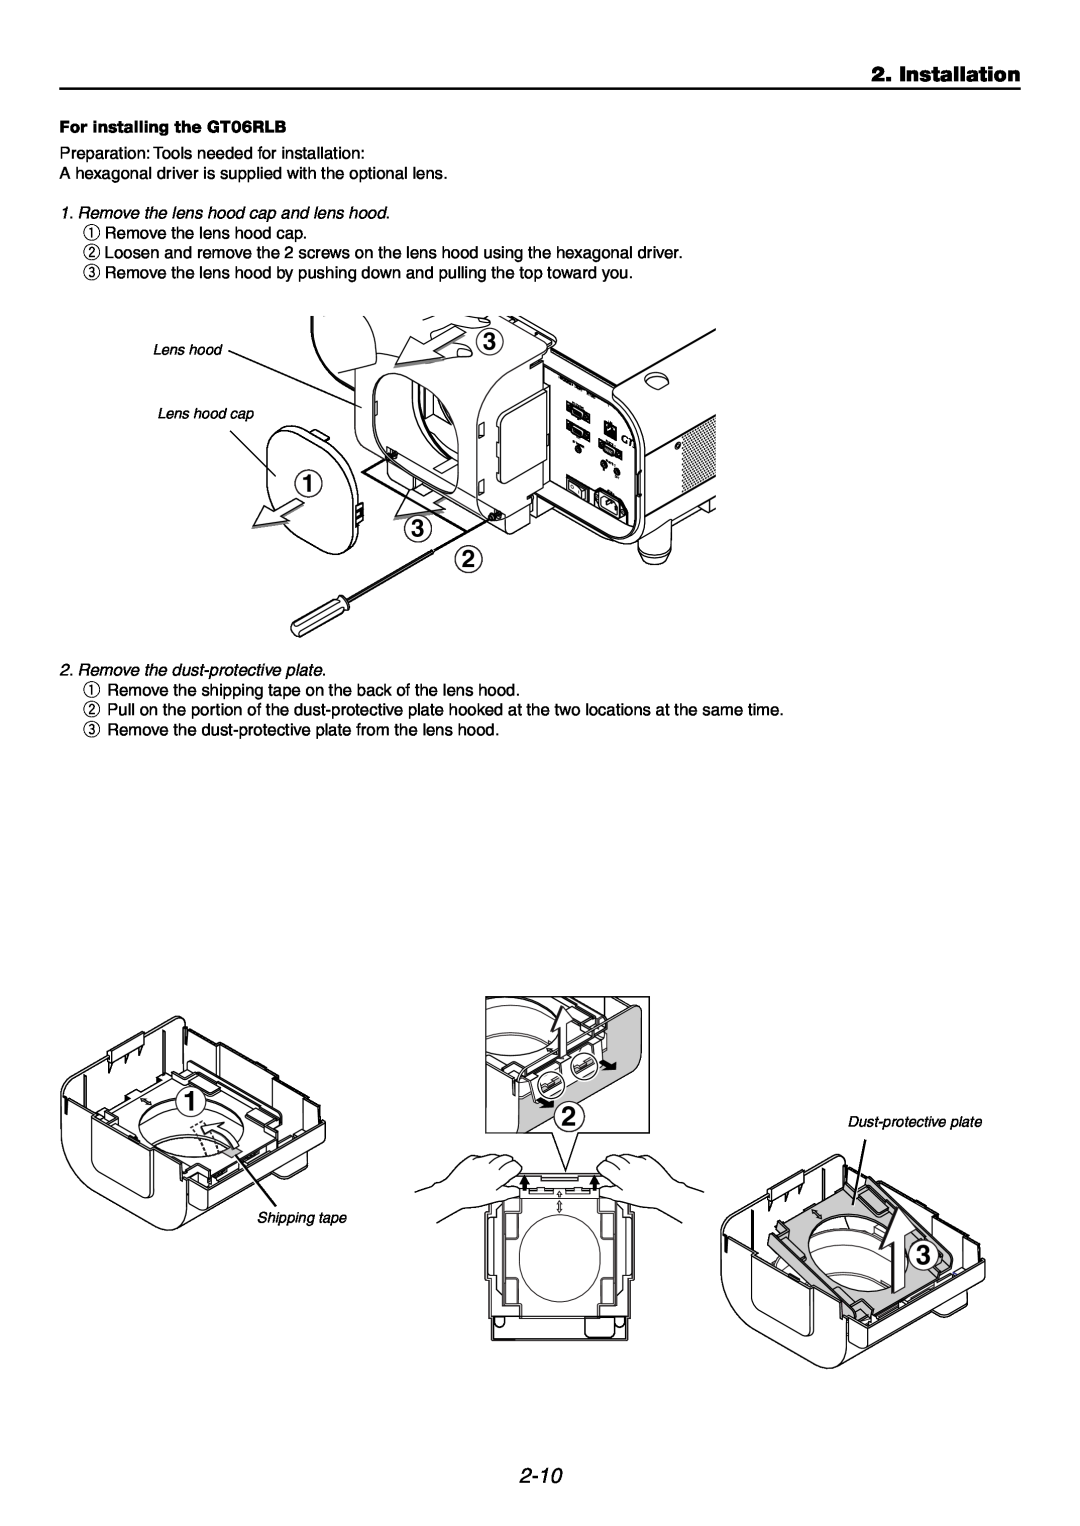 NEC GT6000 user manual Installation, 2-10, For installing the GT06RLB, Pc C, OTE2, Out Ac In 